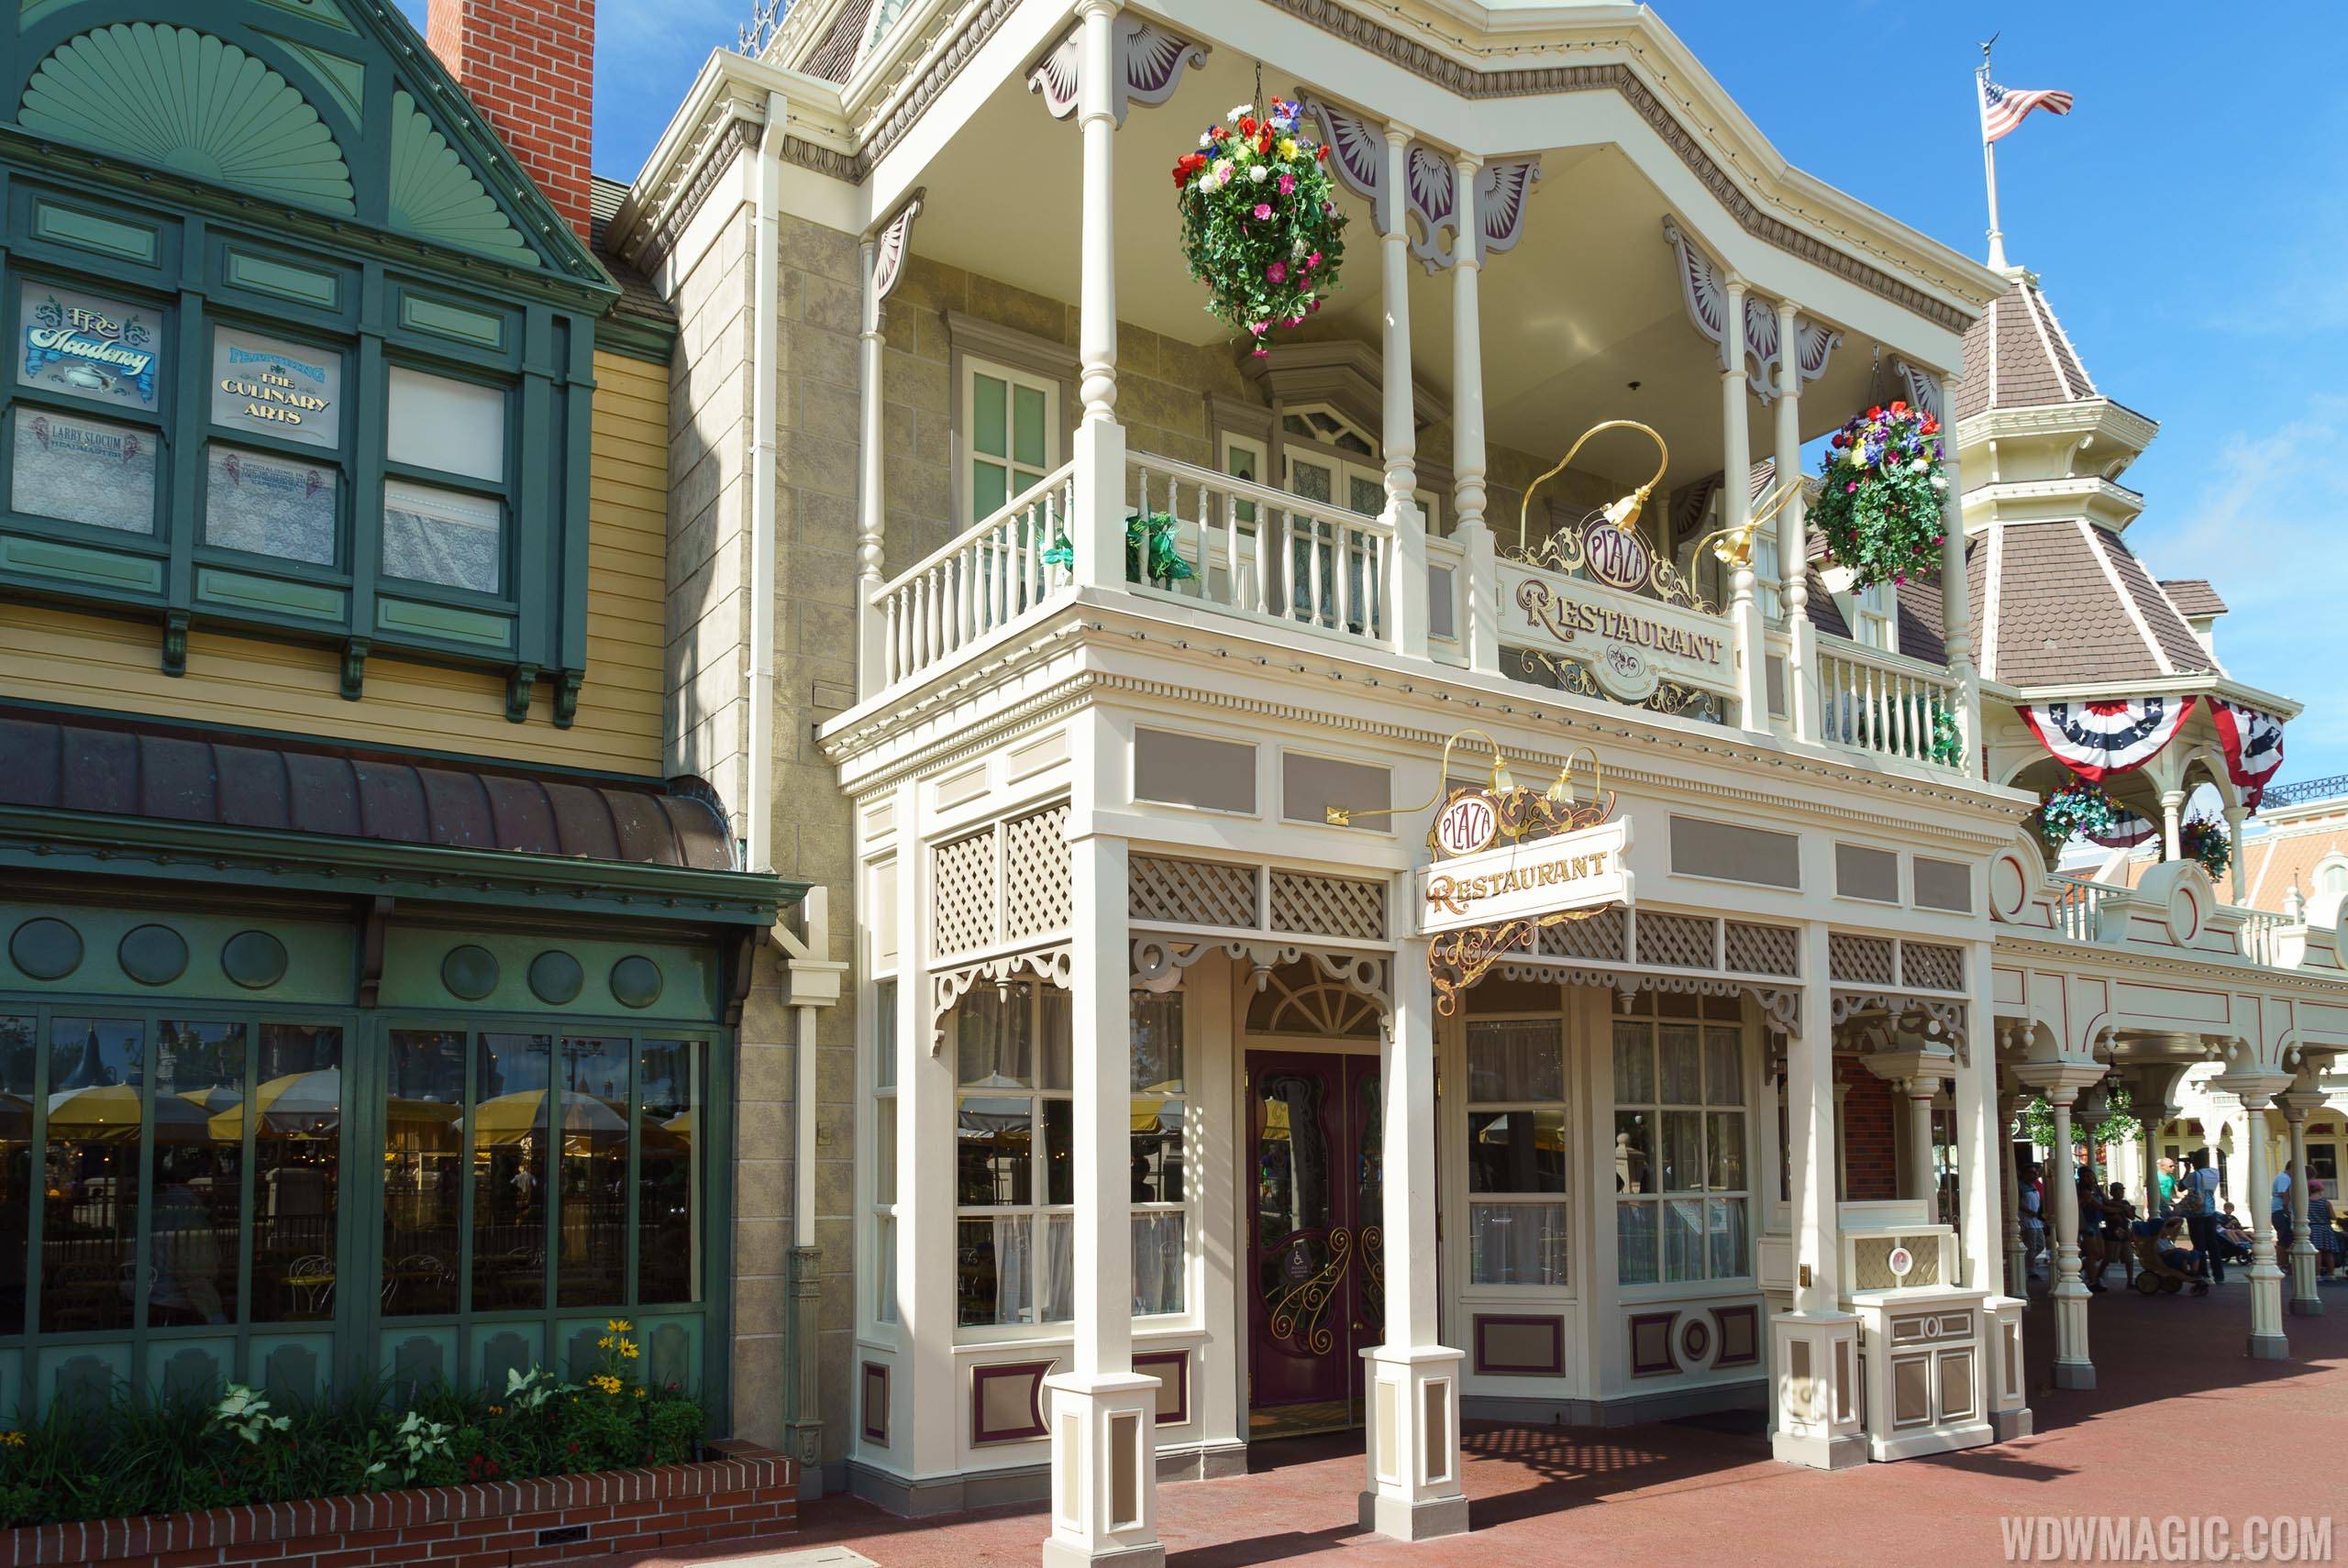 PHOTOS - The Plaza Restaurant to offer breakfast at the Magic Kingdom